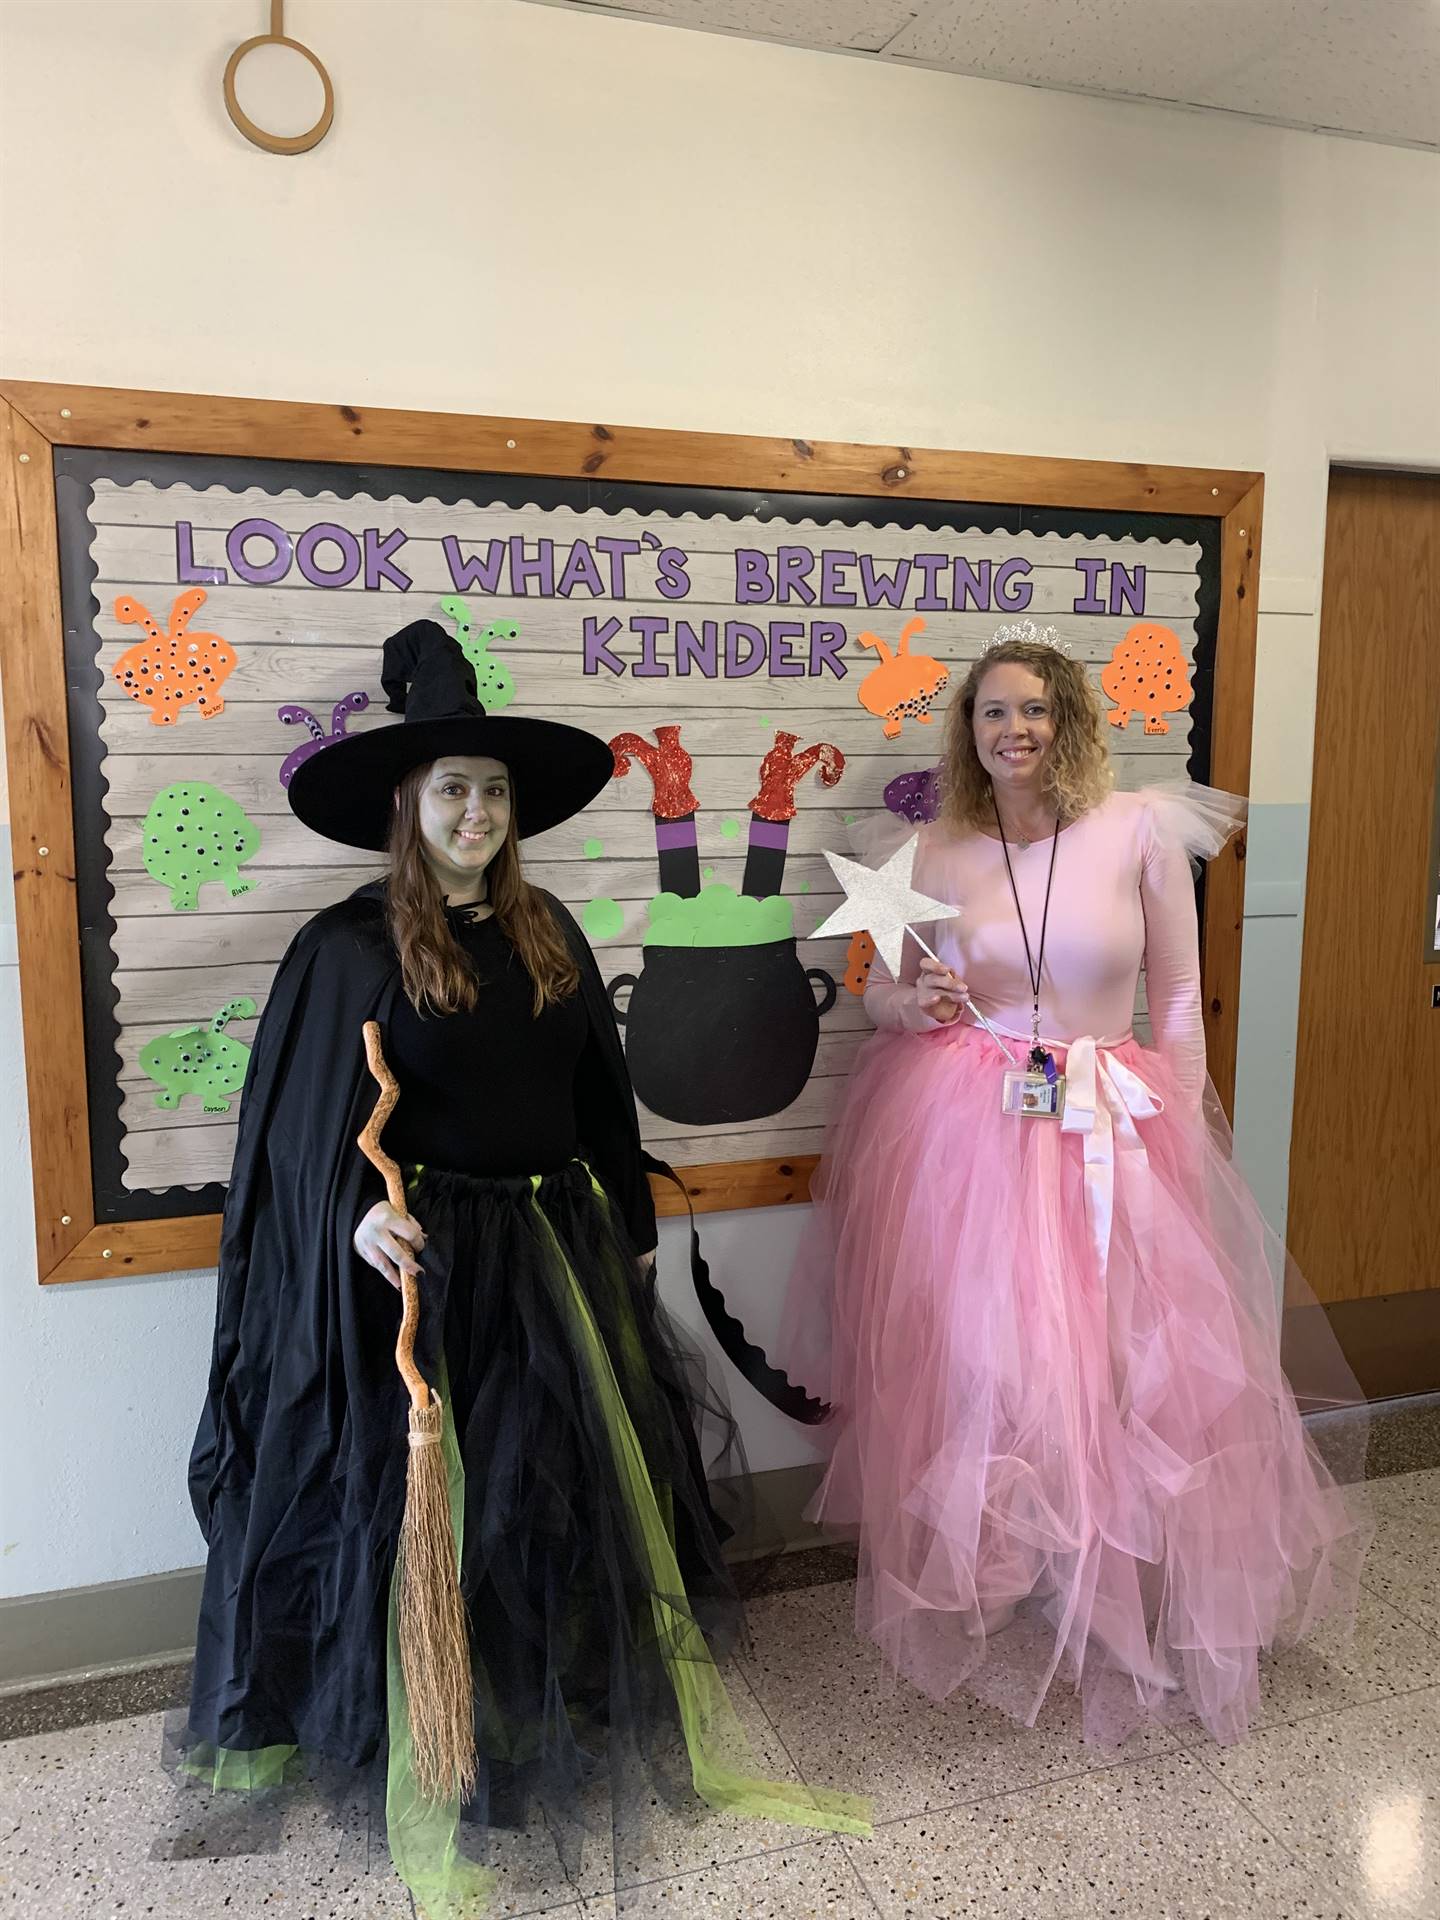 The good witch in pink and the bad witch in black. 